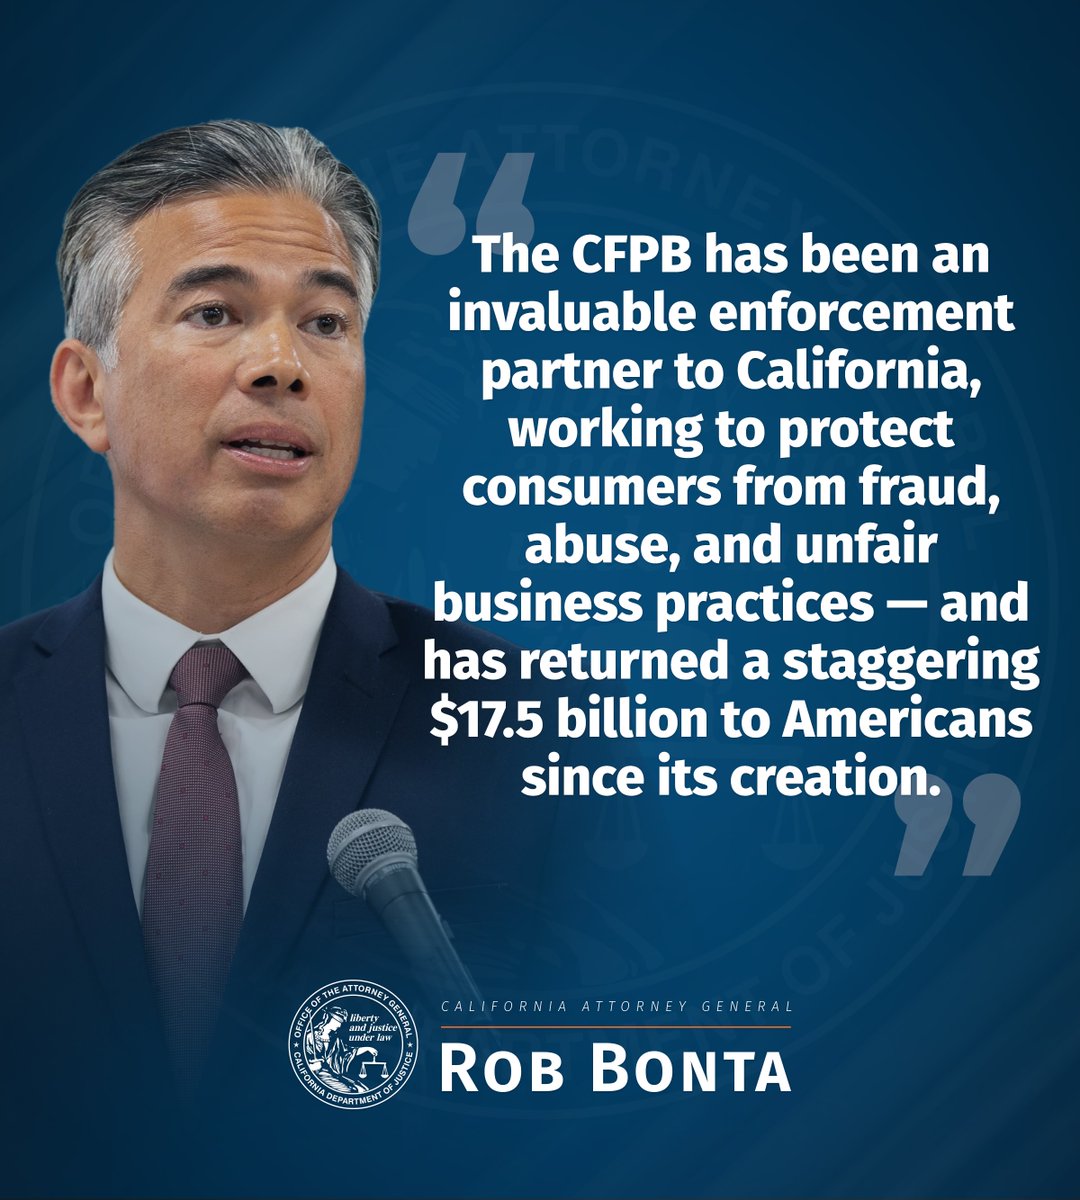 Today’s decision reaffirms the absolutely critical role @CFPB has in advancing consumer protection & regulating the financial services industry. CA DOJ will continue to use all legal tools at our disposal to robustly enforce CA’s consumer protection laws. oag.ca.gov/news/press-rel…